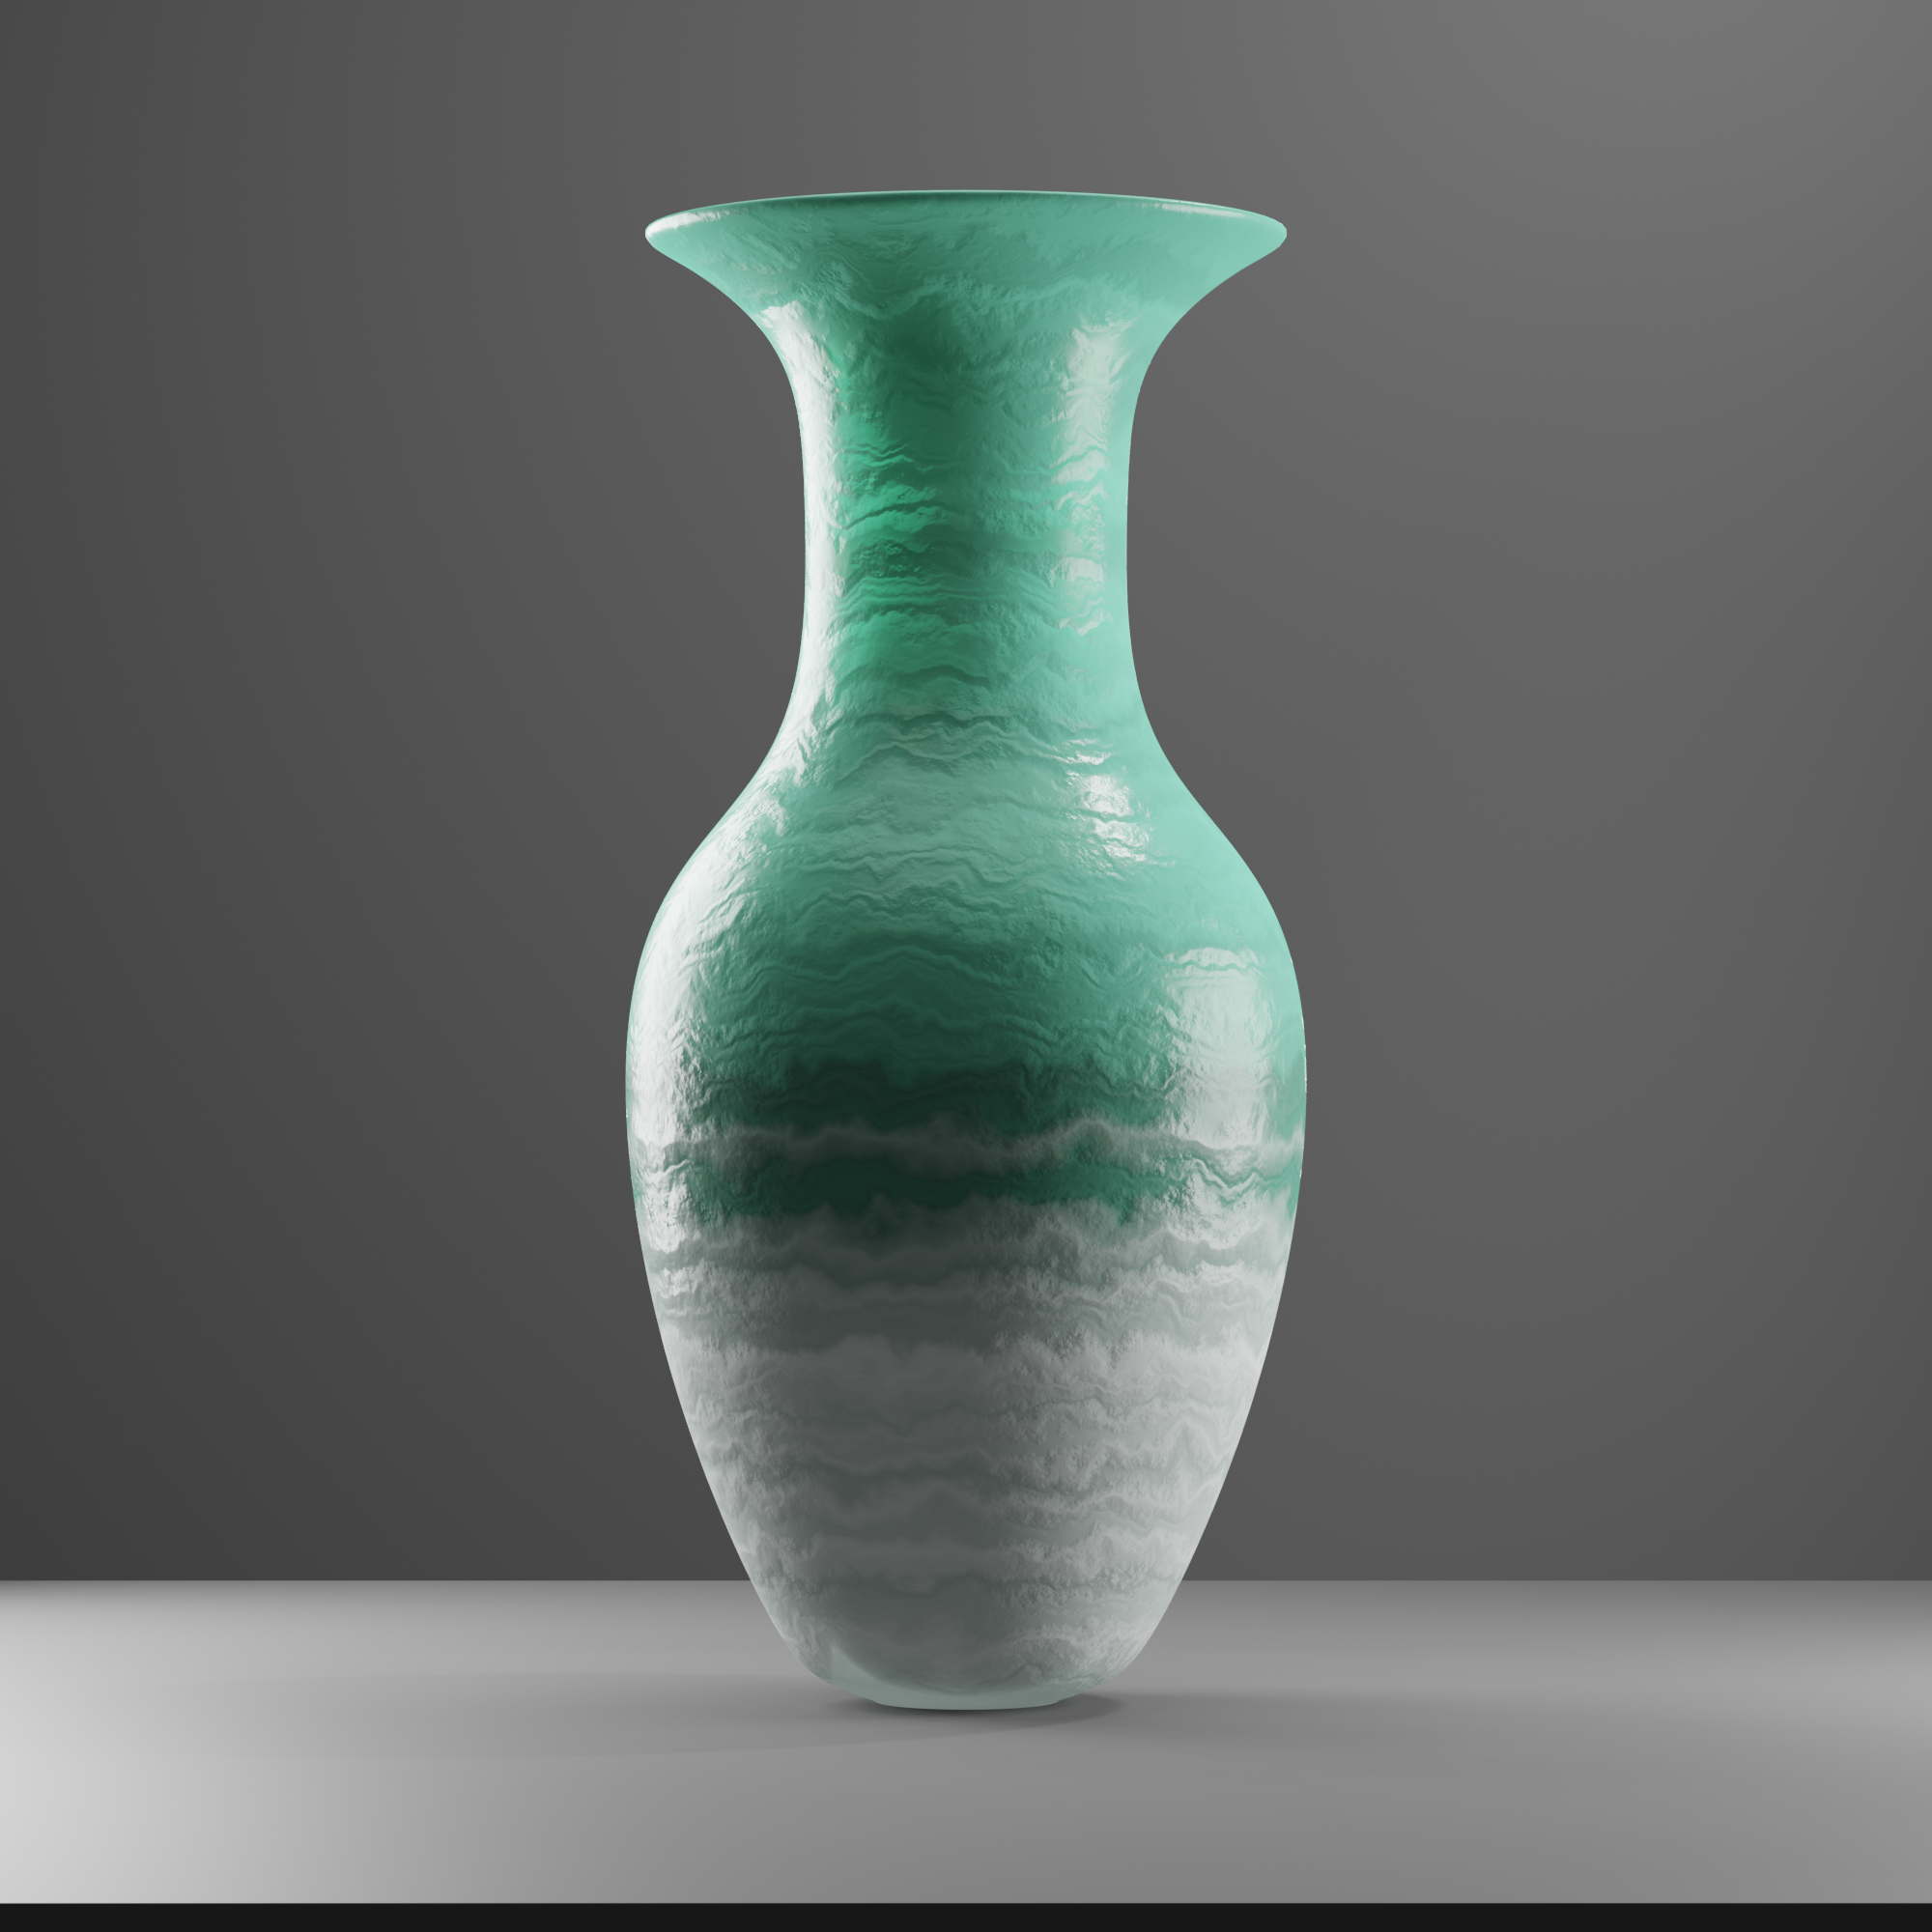 Pack of vases preview image 1